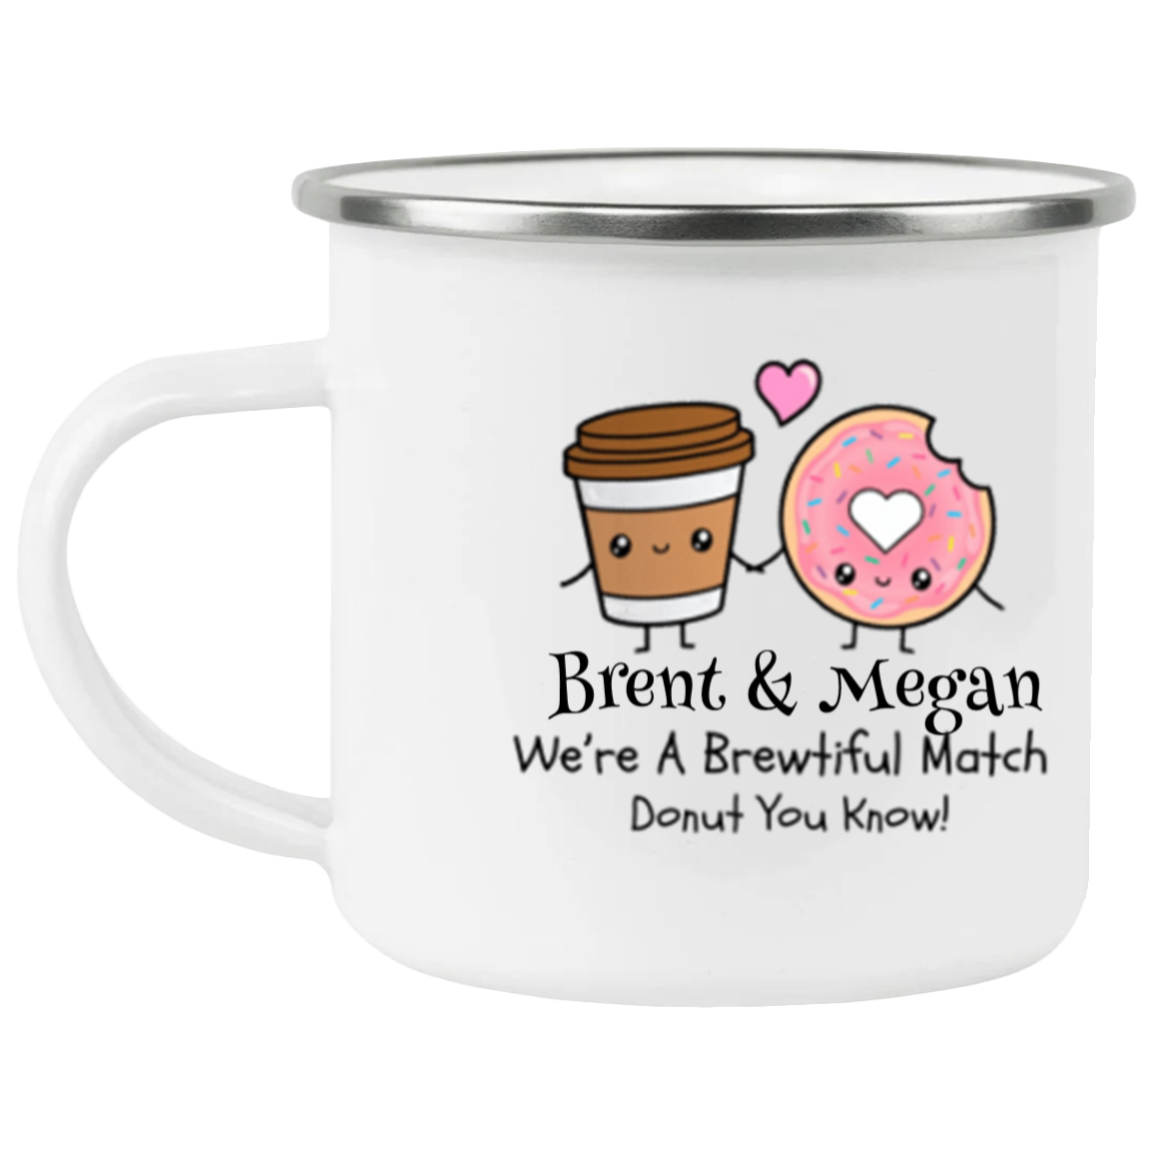 We're Brewtiful Match Donut you know Personalized Mug